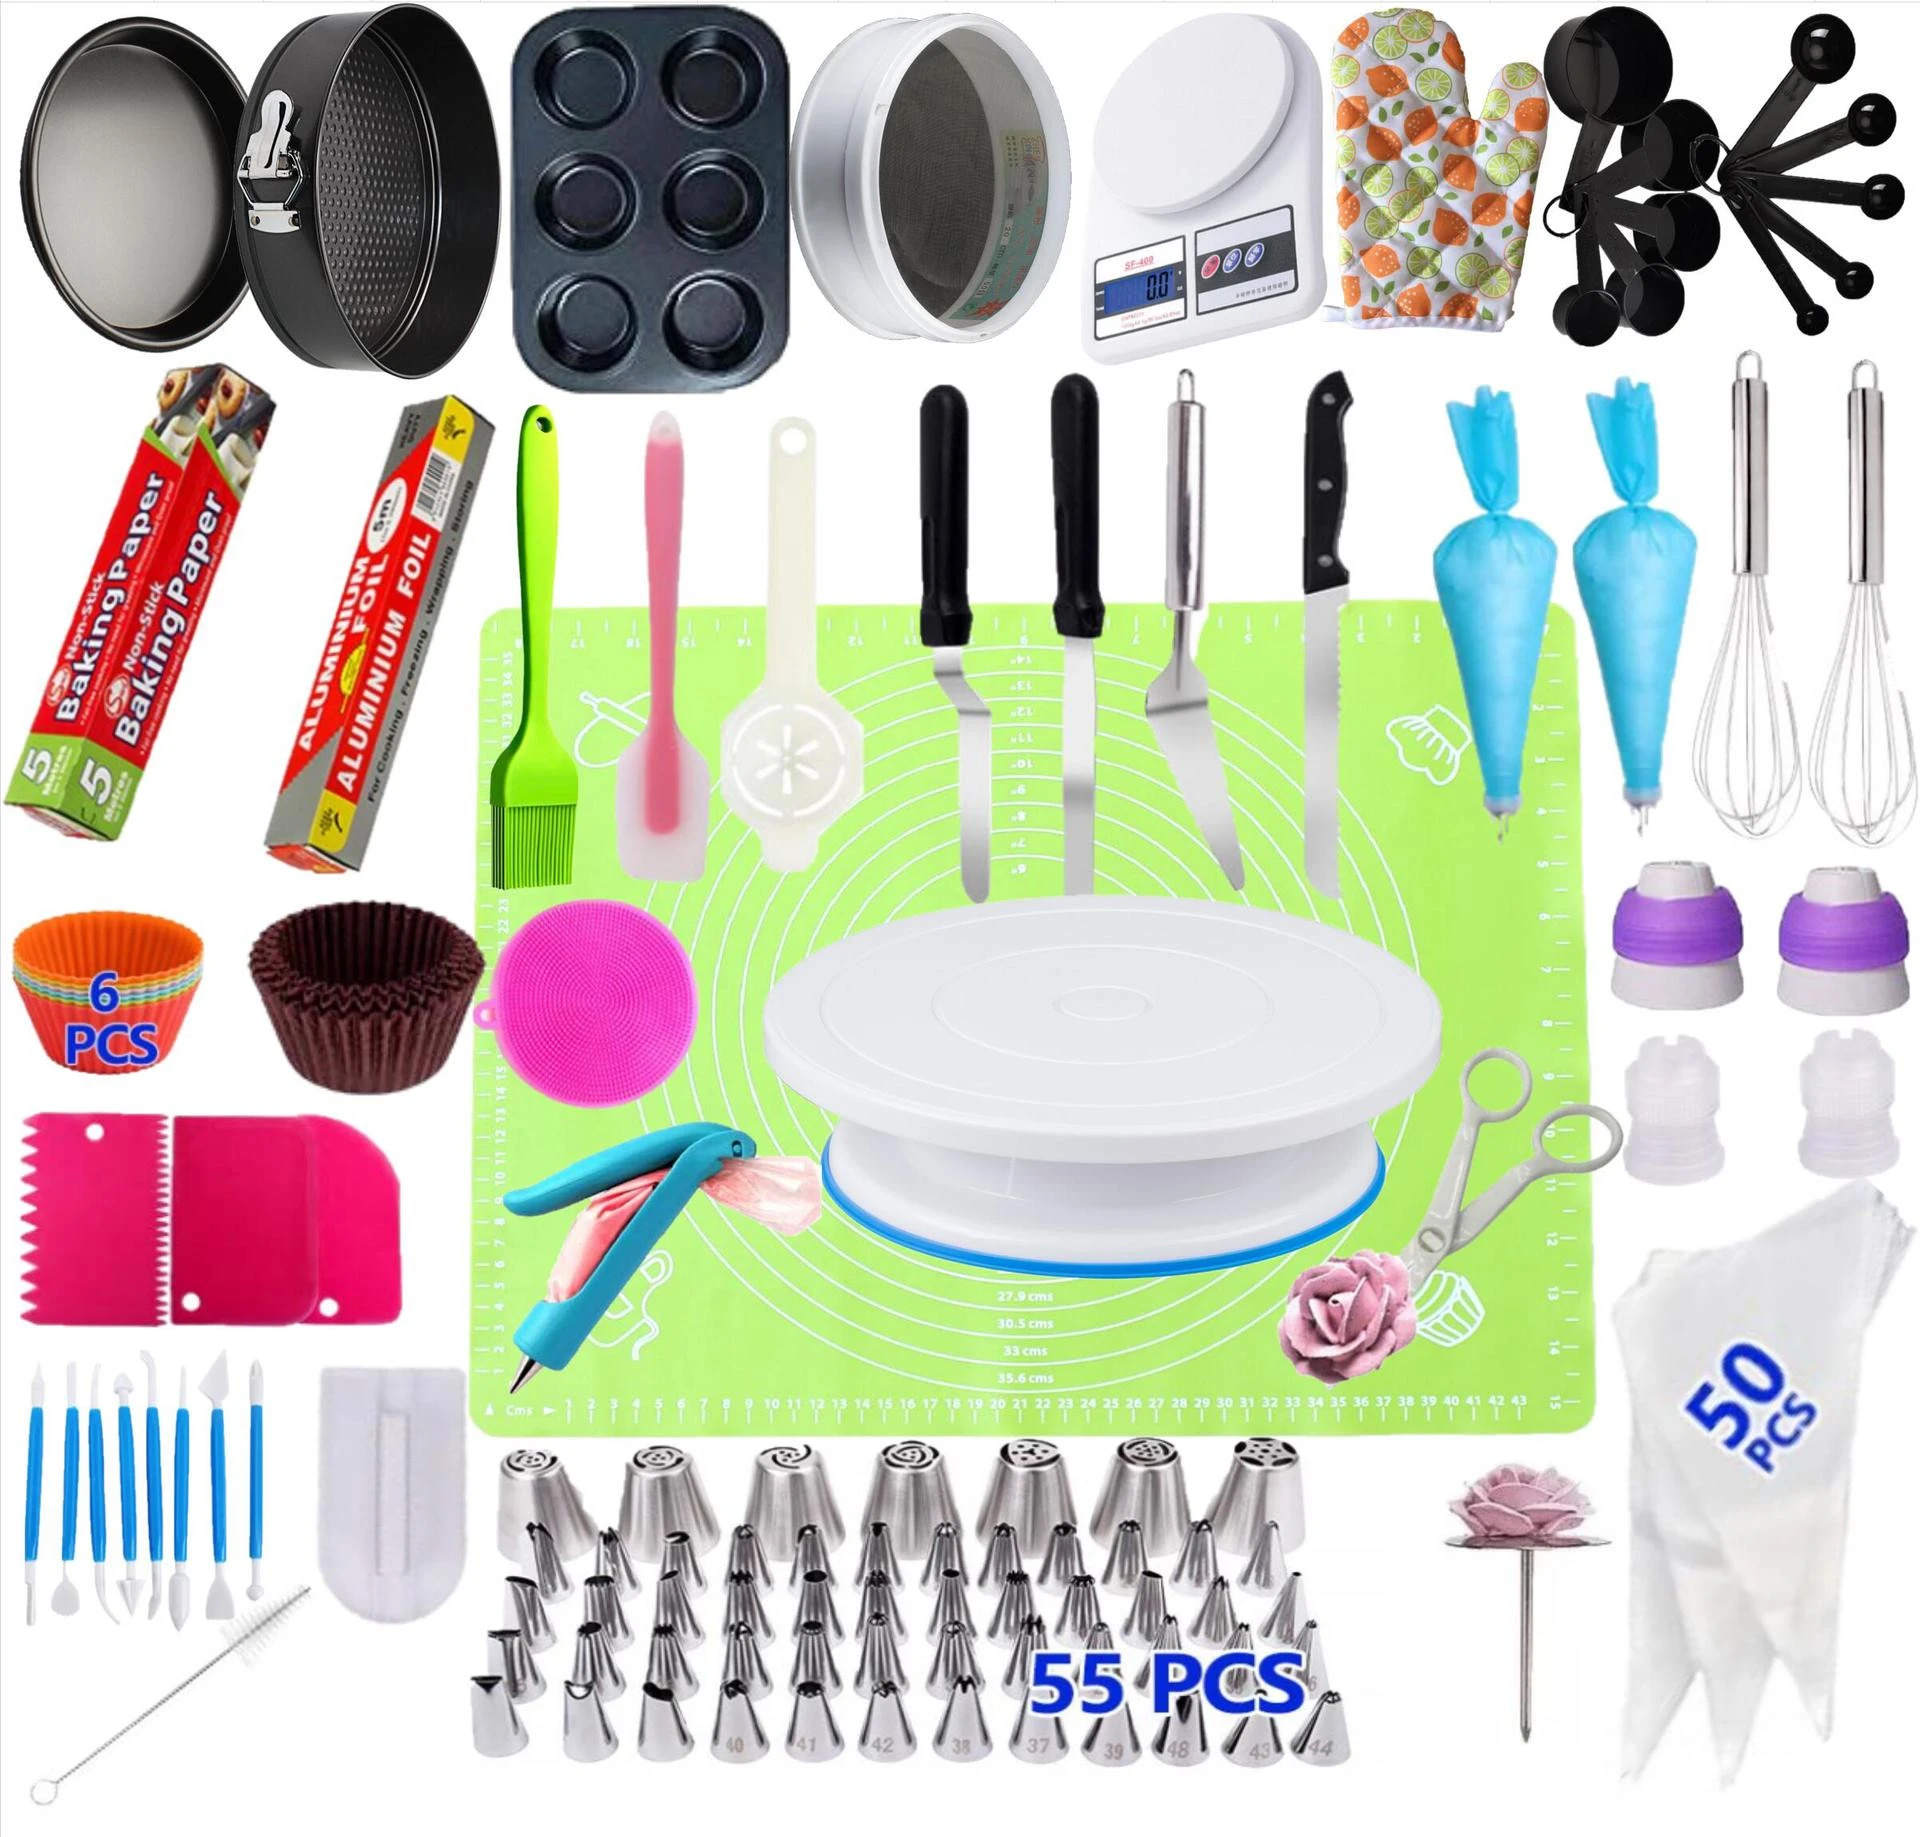 106 pcs Cake Decorating Kit With Rotating Turntable Stand, Icing Piping Tips Pastry Bags, Icing Spatula Smoother